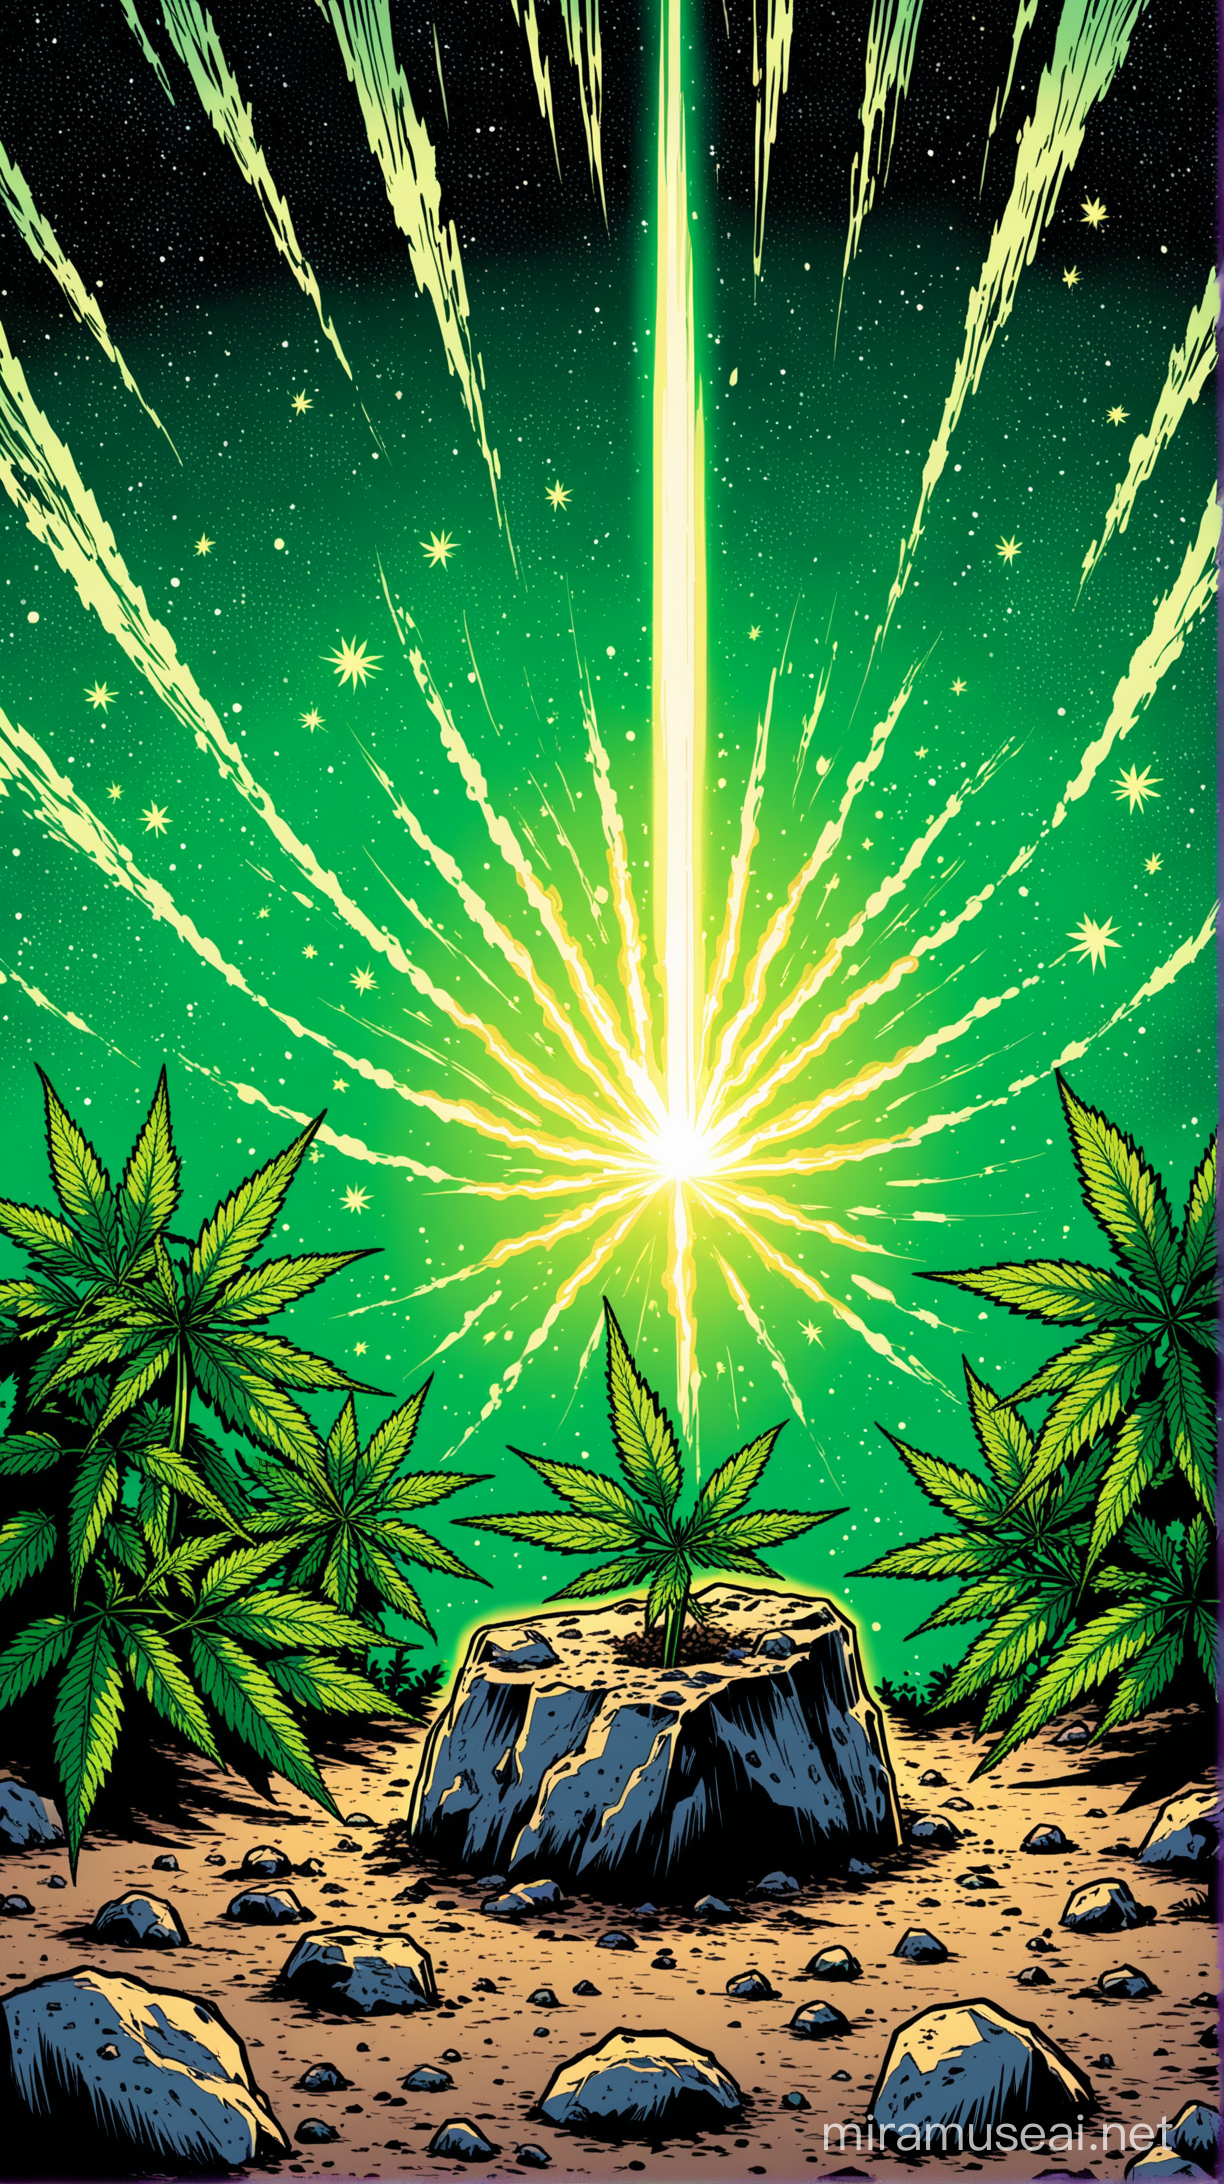 A small meteor rock has fallen onto a marijuana patch on the ground it has effected the marijuana plants making the roots of the plant batch is illuminated with cosmic energy comic book style art 